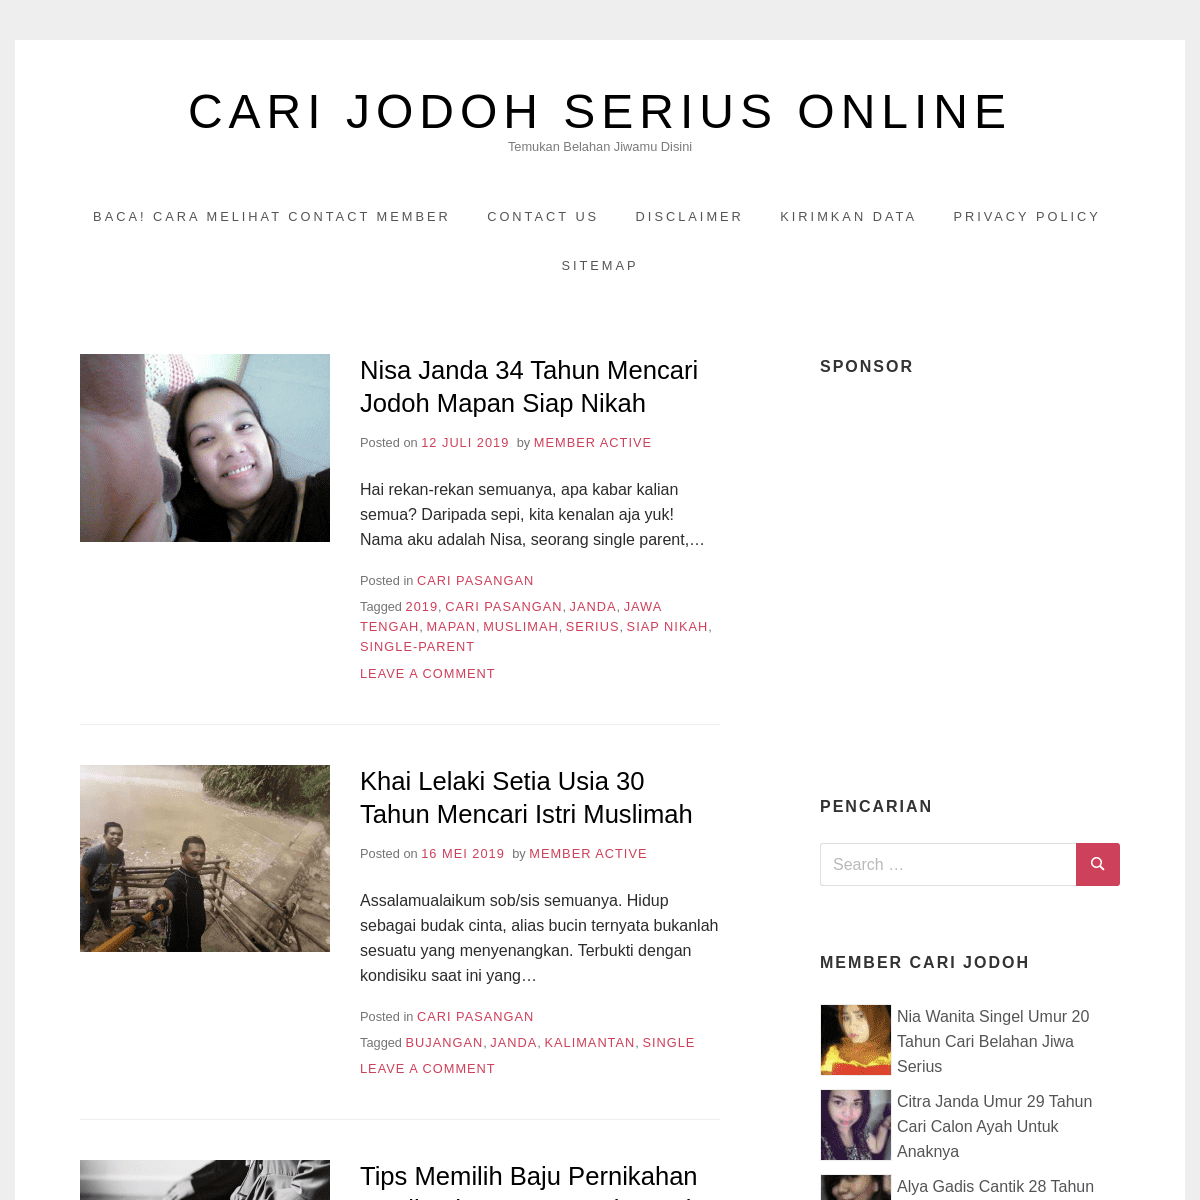 A complete backup of carijodohserius.online